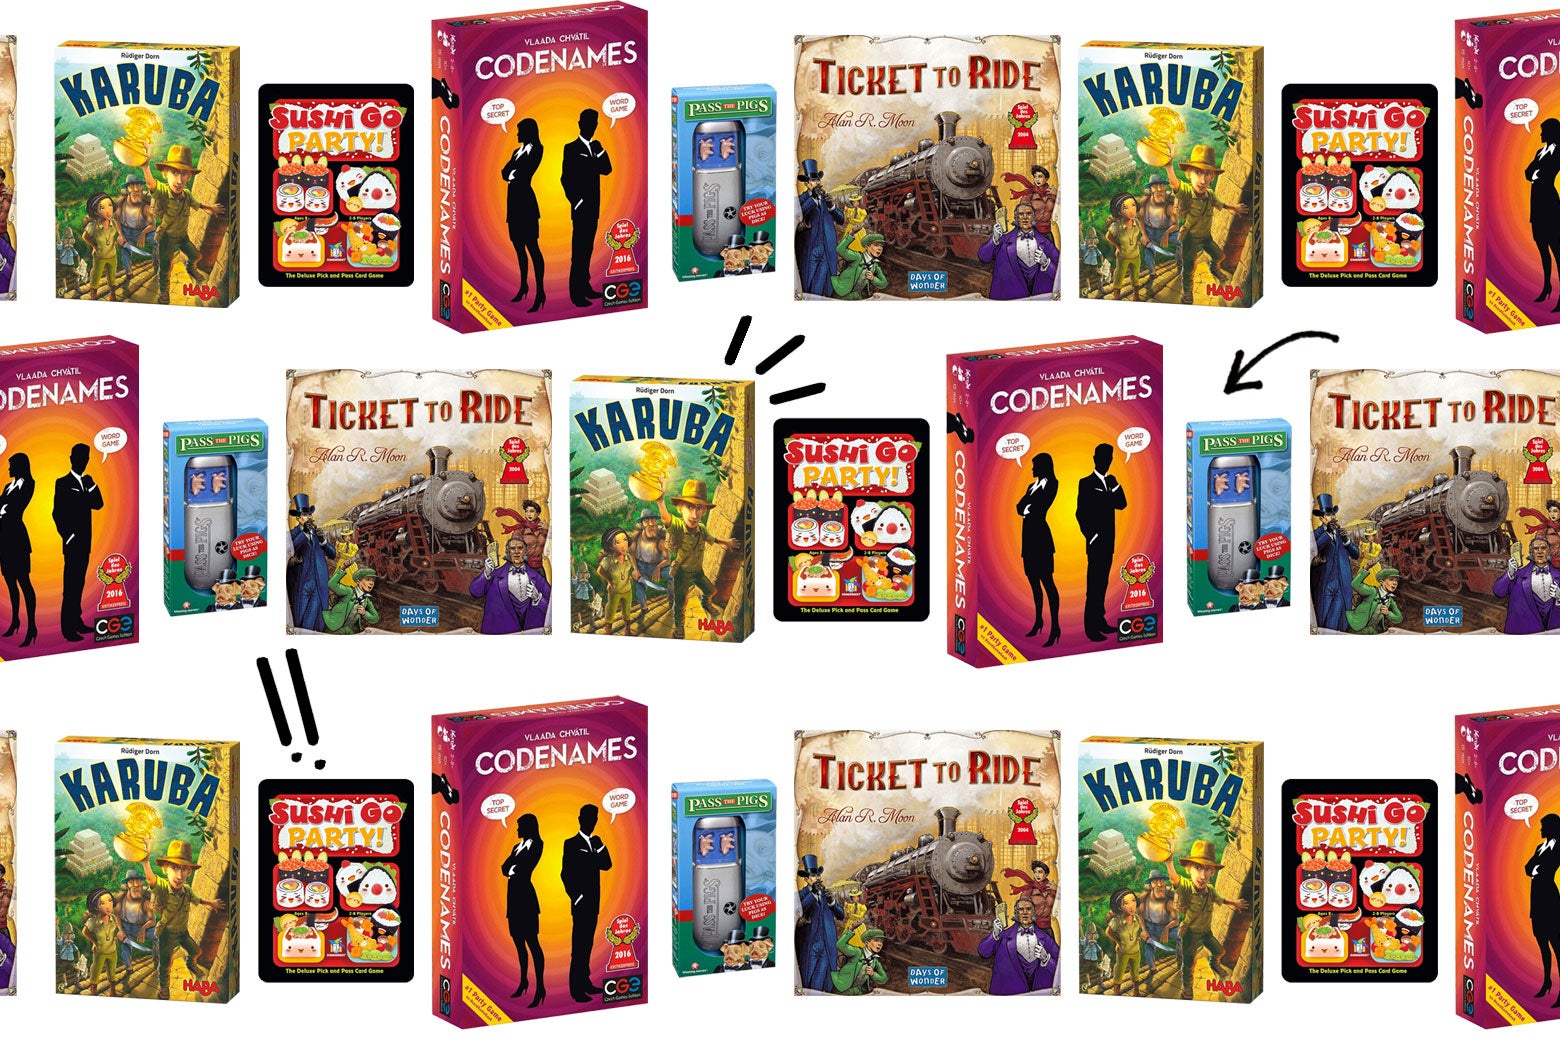 A collage of board game boxes featuring Ticket to Ride, Codenames, Karuba, and more.